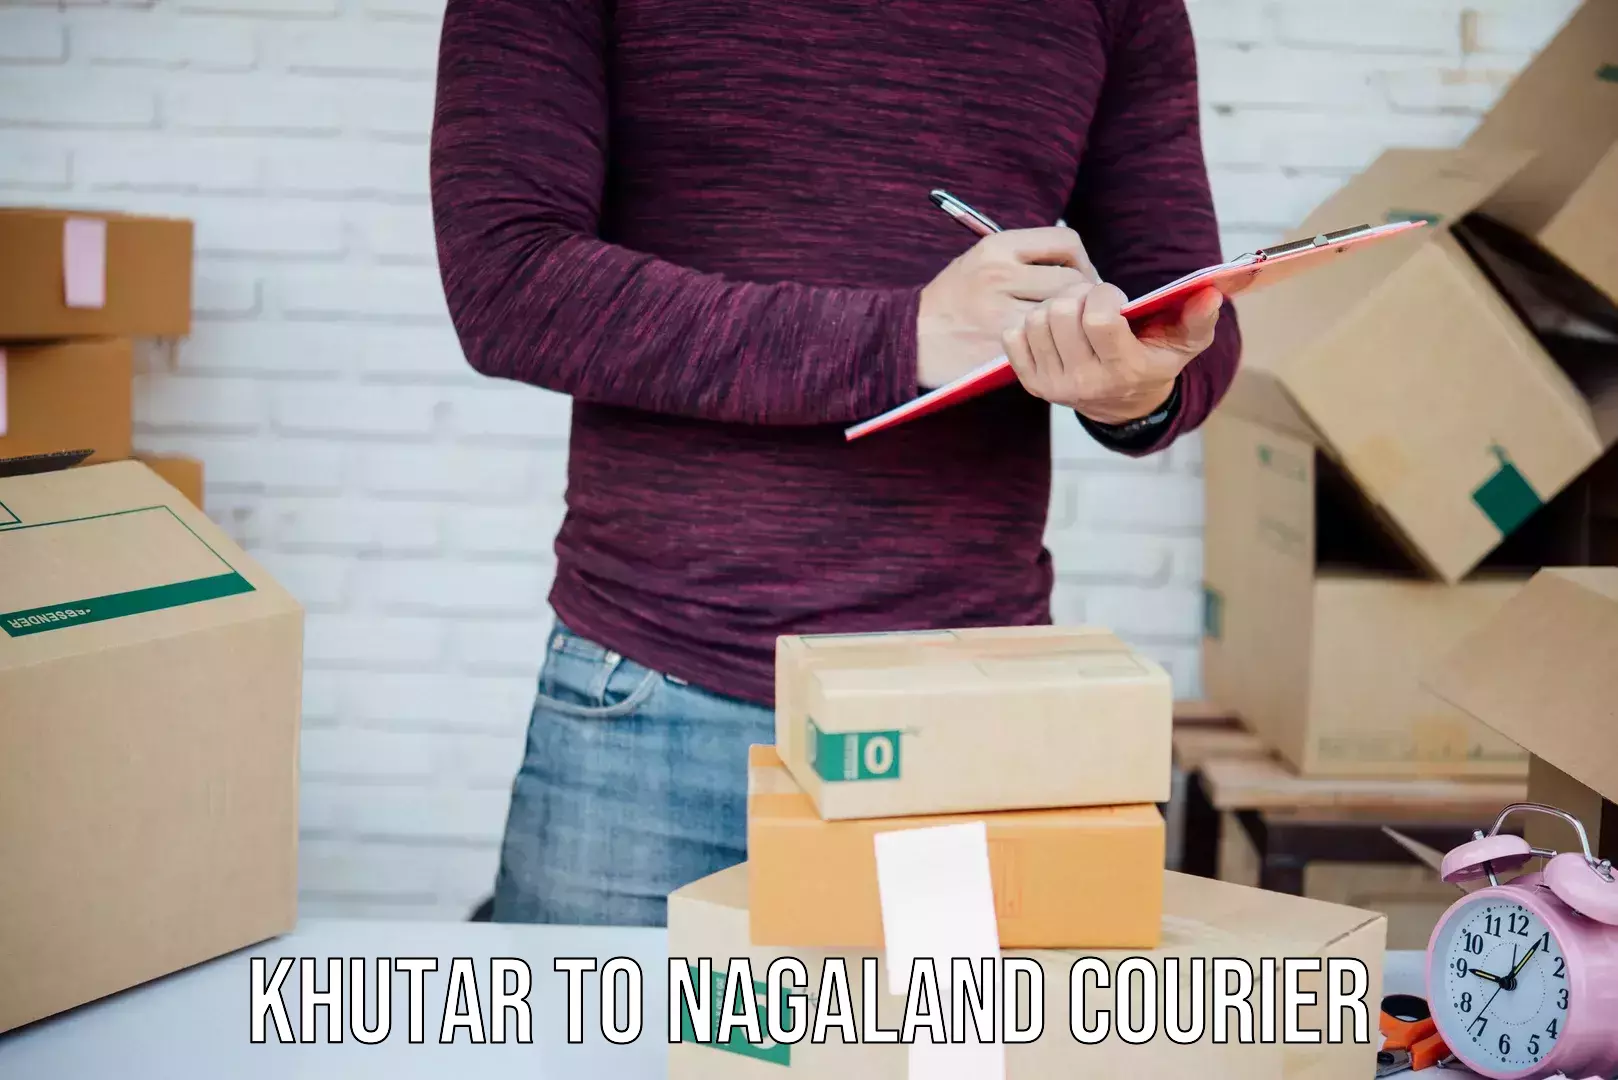 Courier service comparison in Khutar to Nagaland